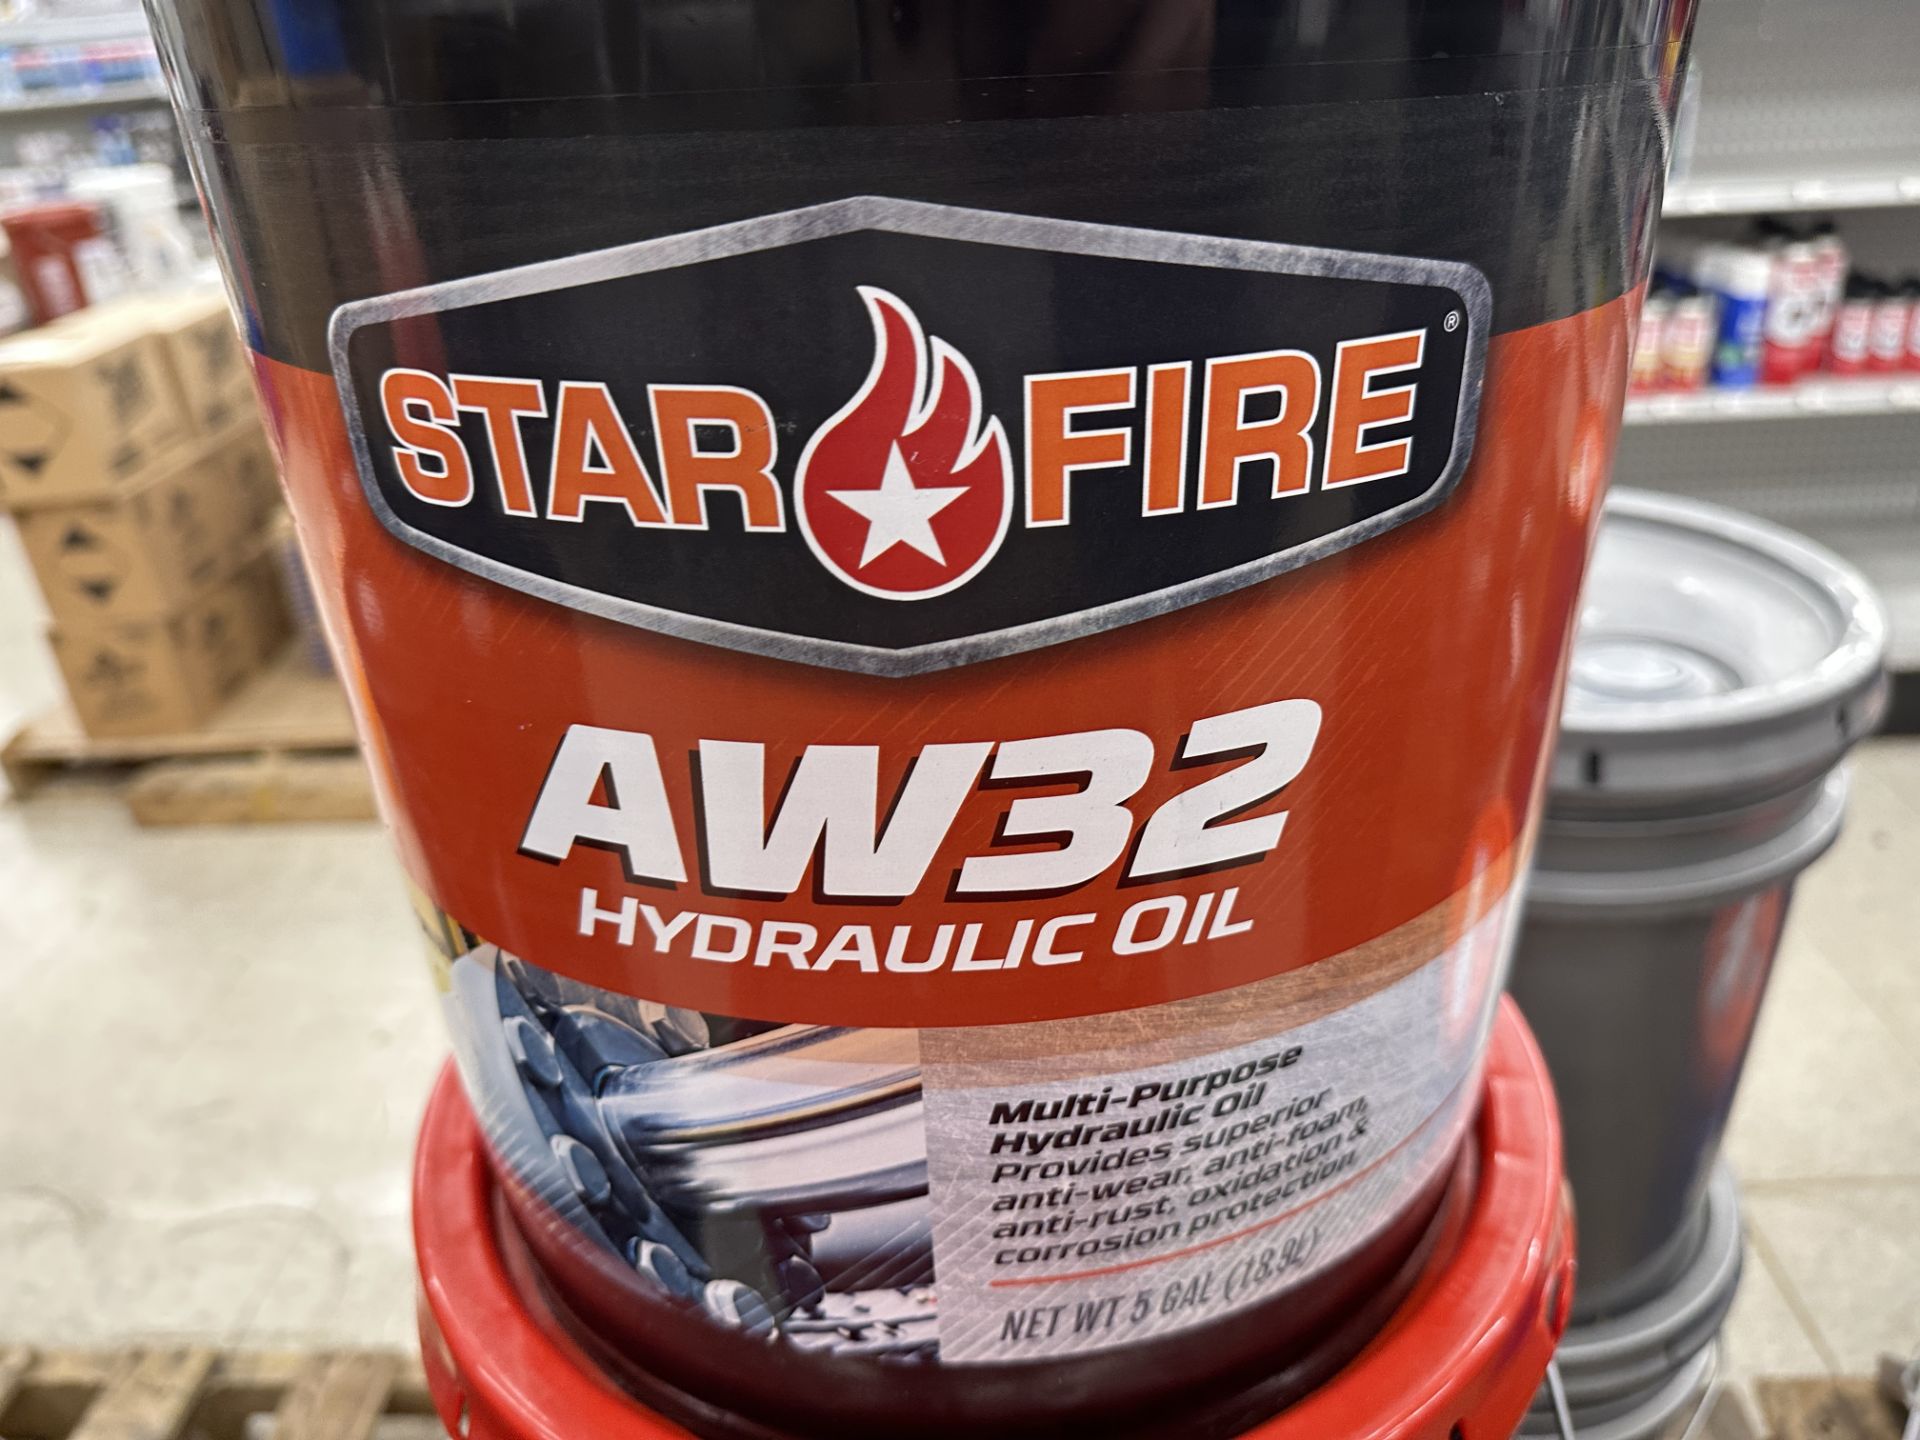 (5) Star Fire 5 Gallon Pail AW32 Hydraulic Fluid Being Sold by The Pail (Retail Each: $70) - Image 2 of 2